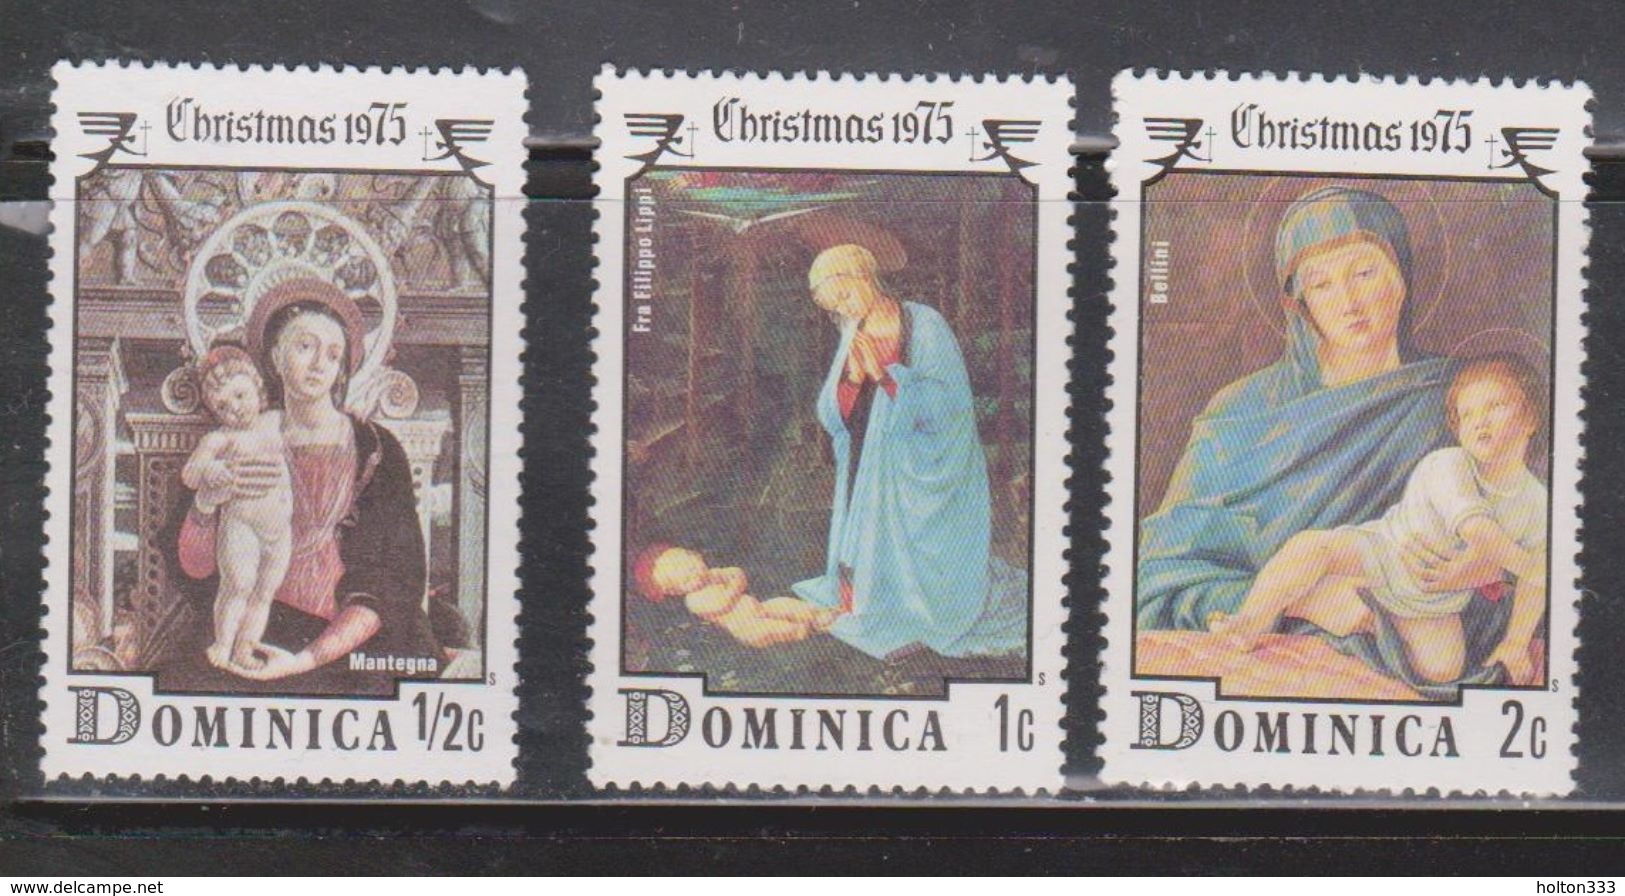 DOMINICA Scott # 447-9 MNH - Christmas Issue 1975 - Dominica (...-1978)